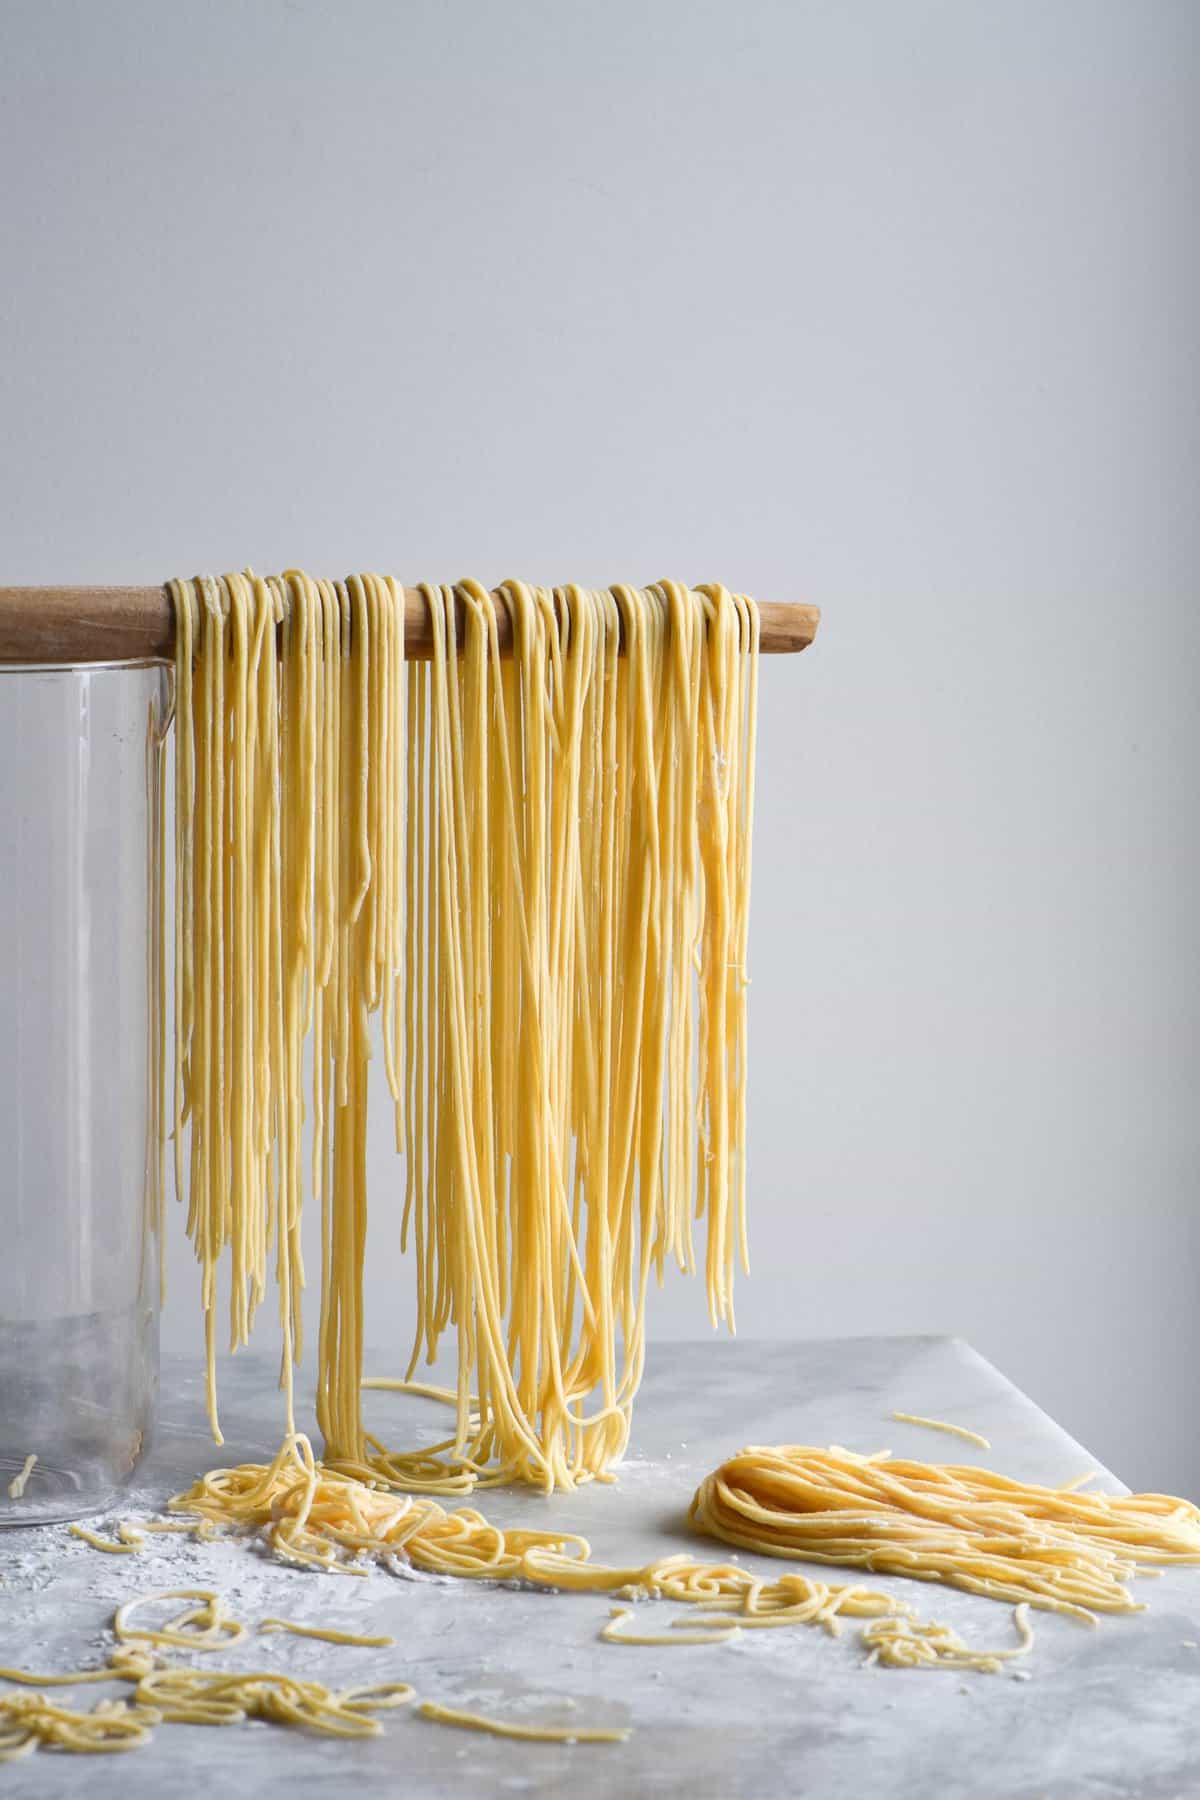 A side on view of gluten free egg noodles in the making. Set against a white marble table and white backdrop, noodles are draped over a spoon handle to dry as others are strewn across the table